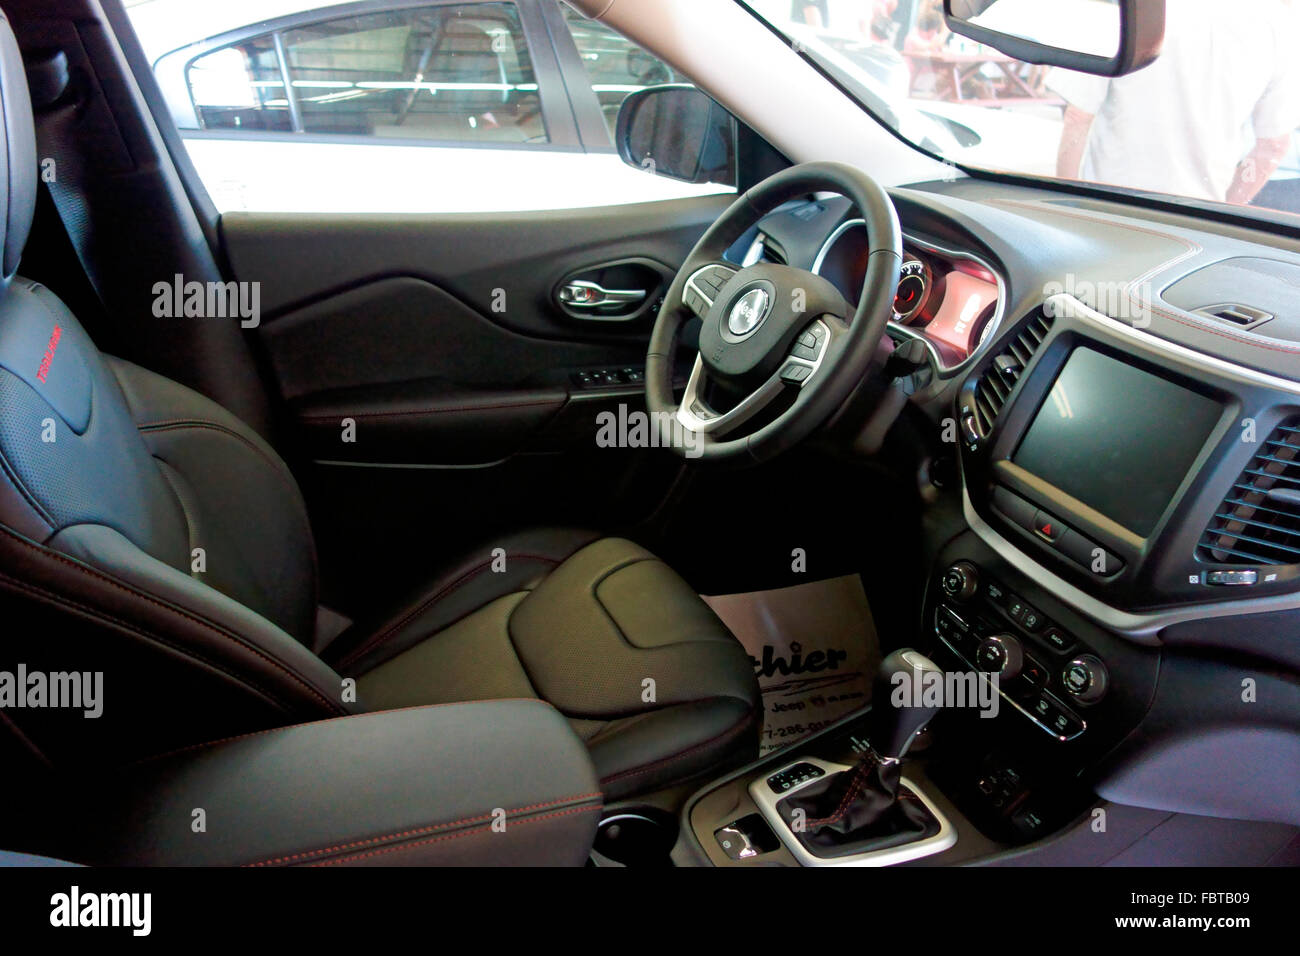 The front interior seats dash and steering wheel and navigation screen of a 2015 2016 Jeep Cherokee Trailhawk Trail Hawk vehicle Stock Photo